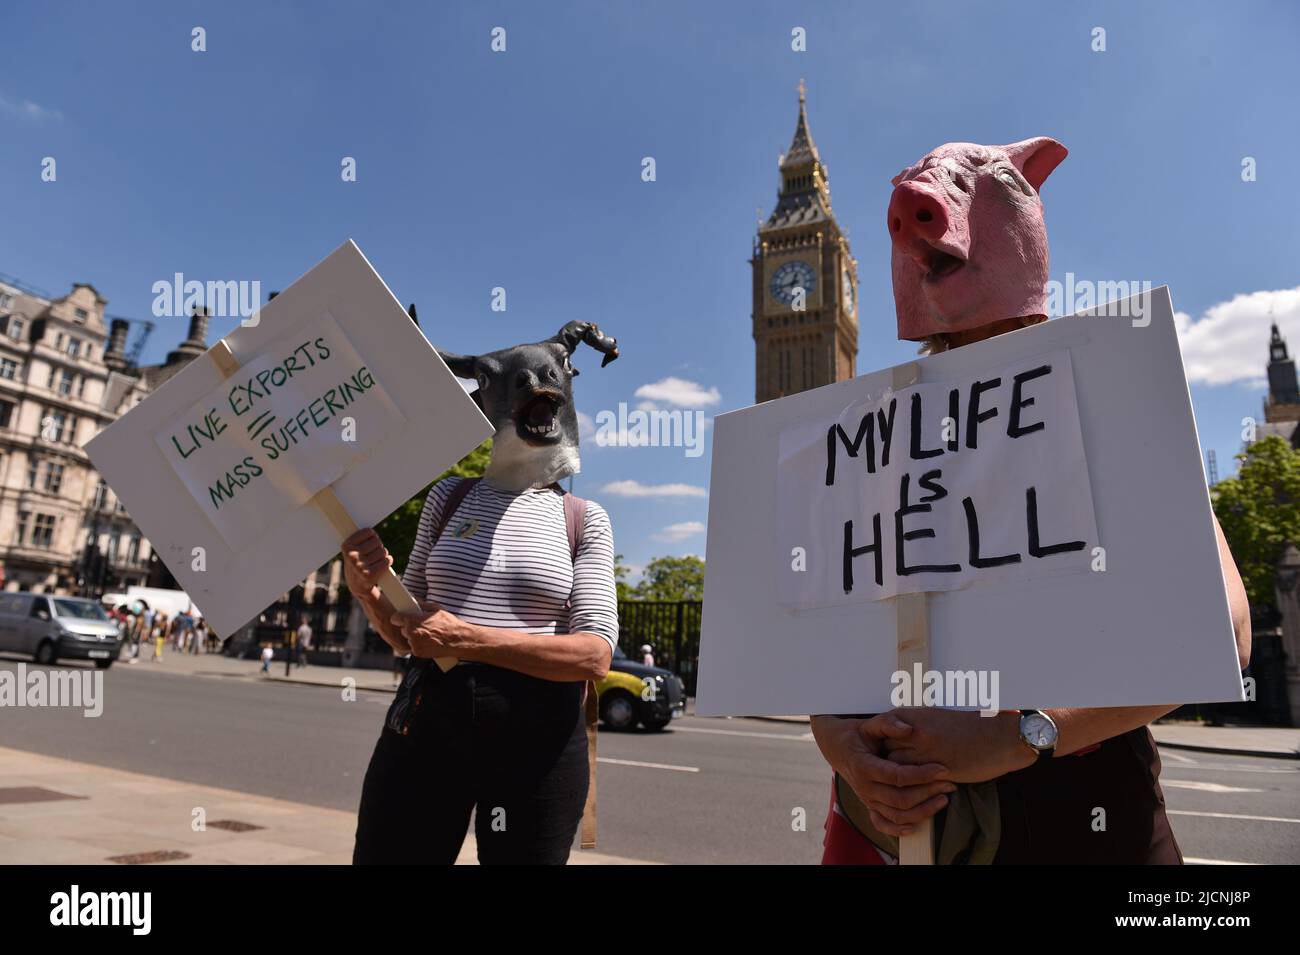 Activists staged a protest in Parliament Square to call on the UK Government to end live animal exports. Stock Photo